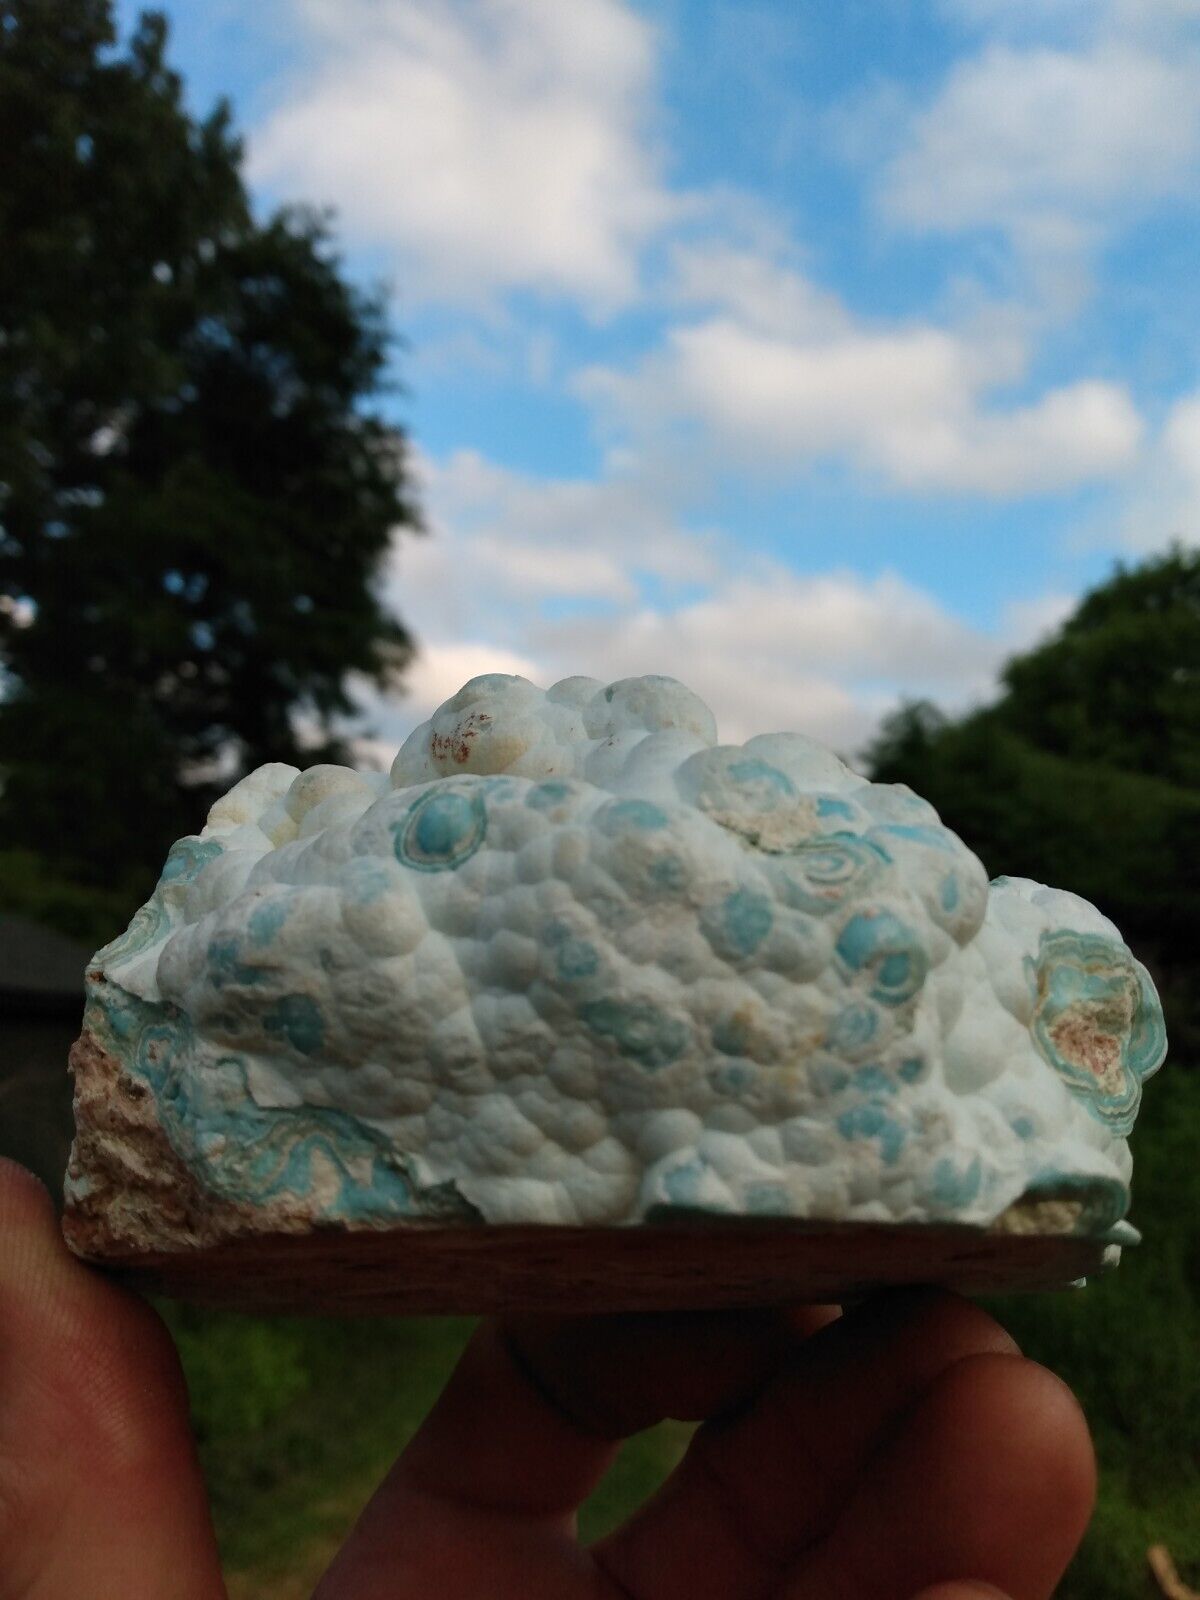 575g Turquoise Blue Natural hemimorphite rough raw crystal Mineral Specimen